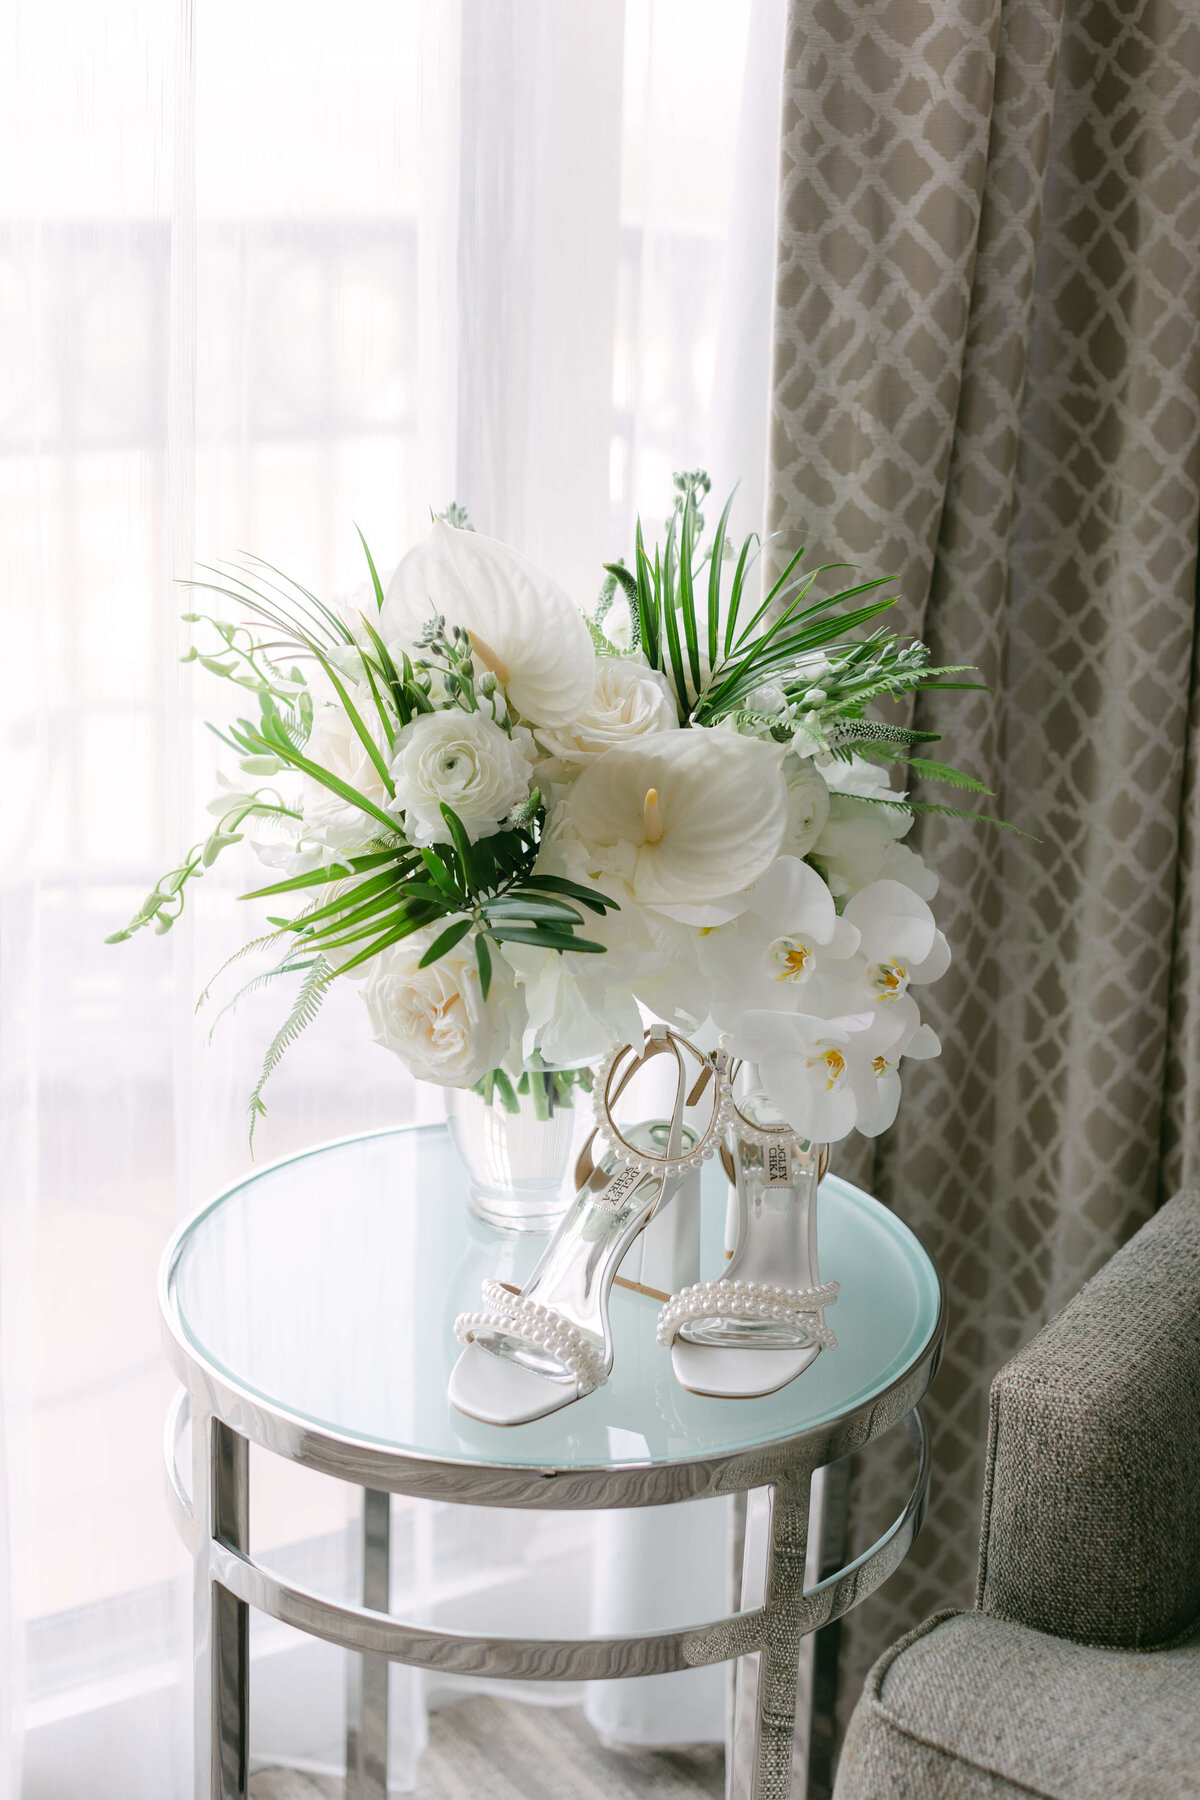 White flowers and palms sit on a bedside table.